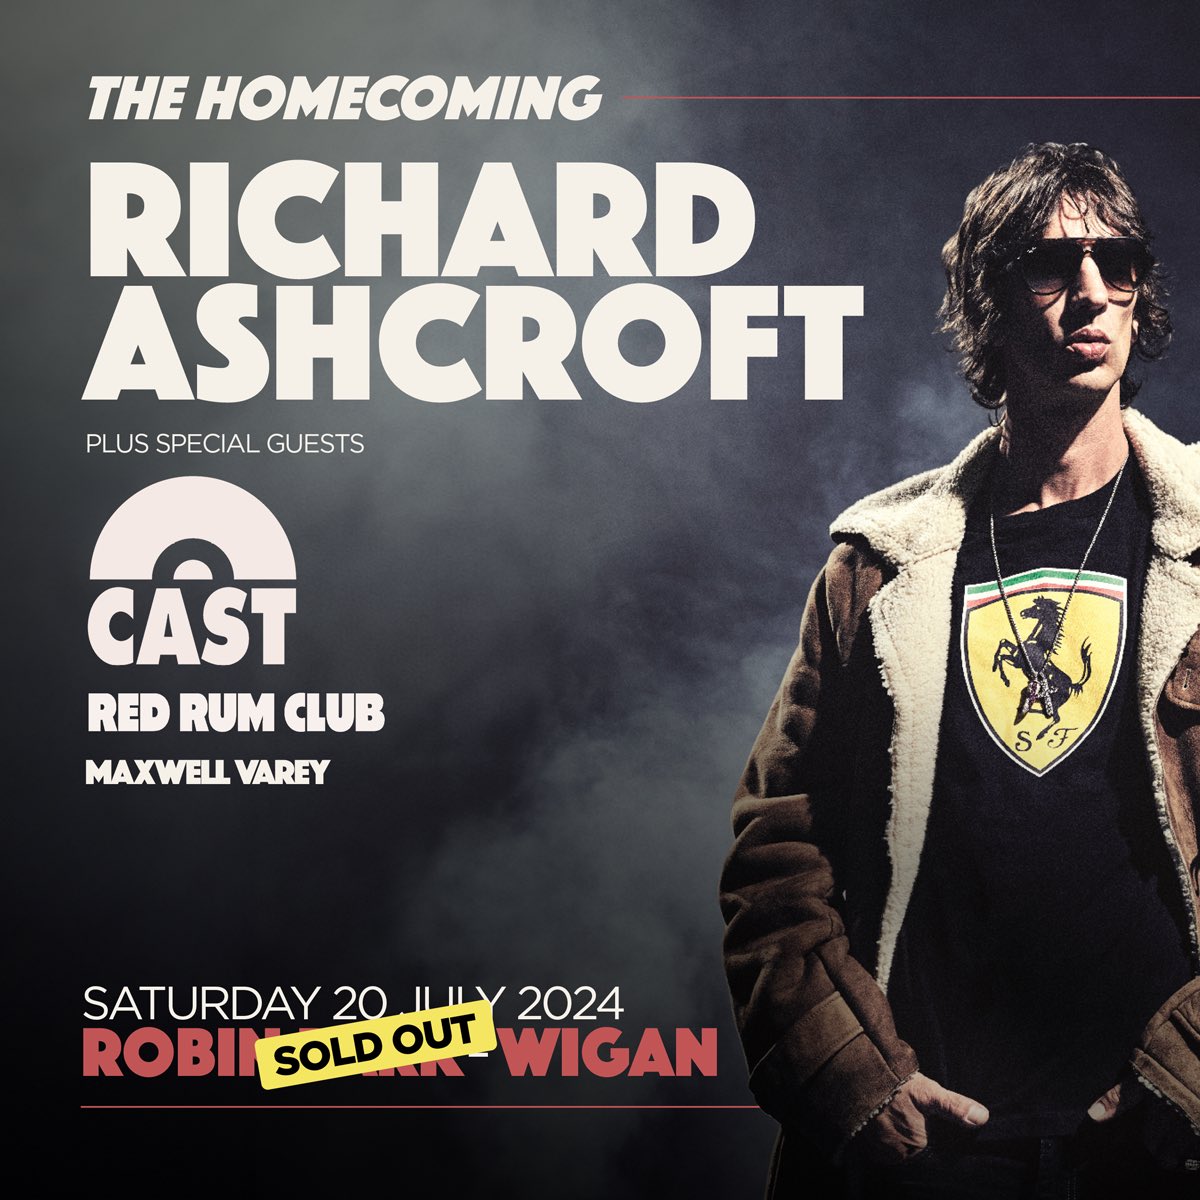 We’re really excited to announced that we’re supporting @richardashcroft at his homecoming show this summer ☀️ Get all the details here 👉 tix.to/RARobinParkSat